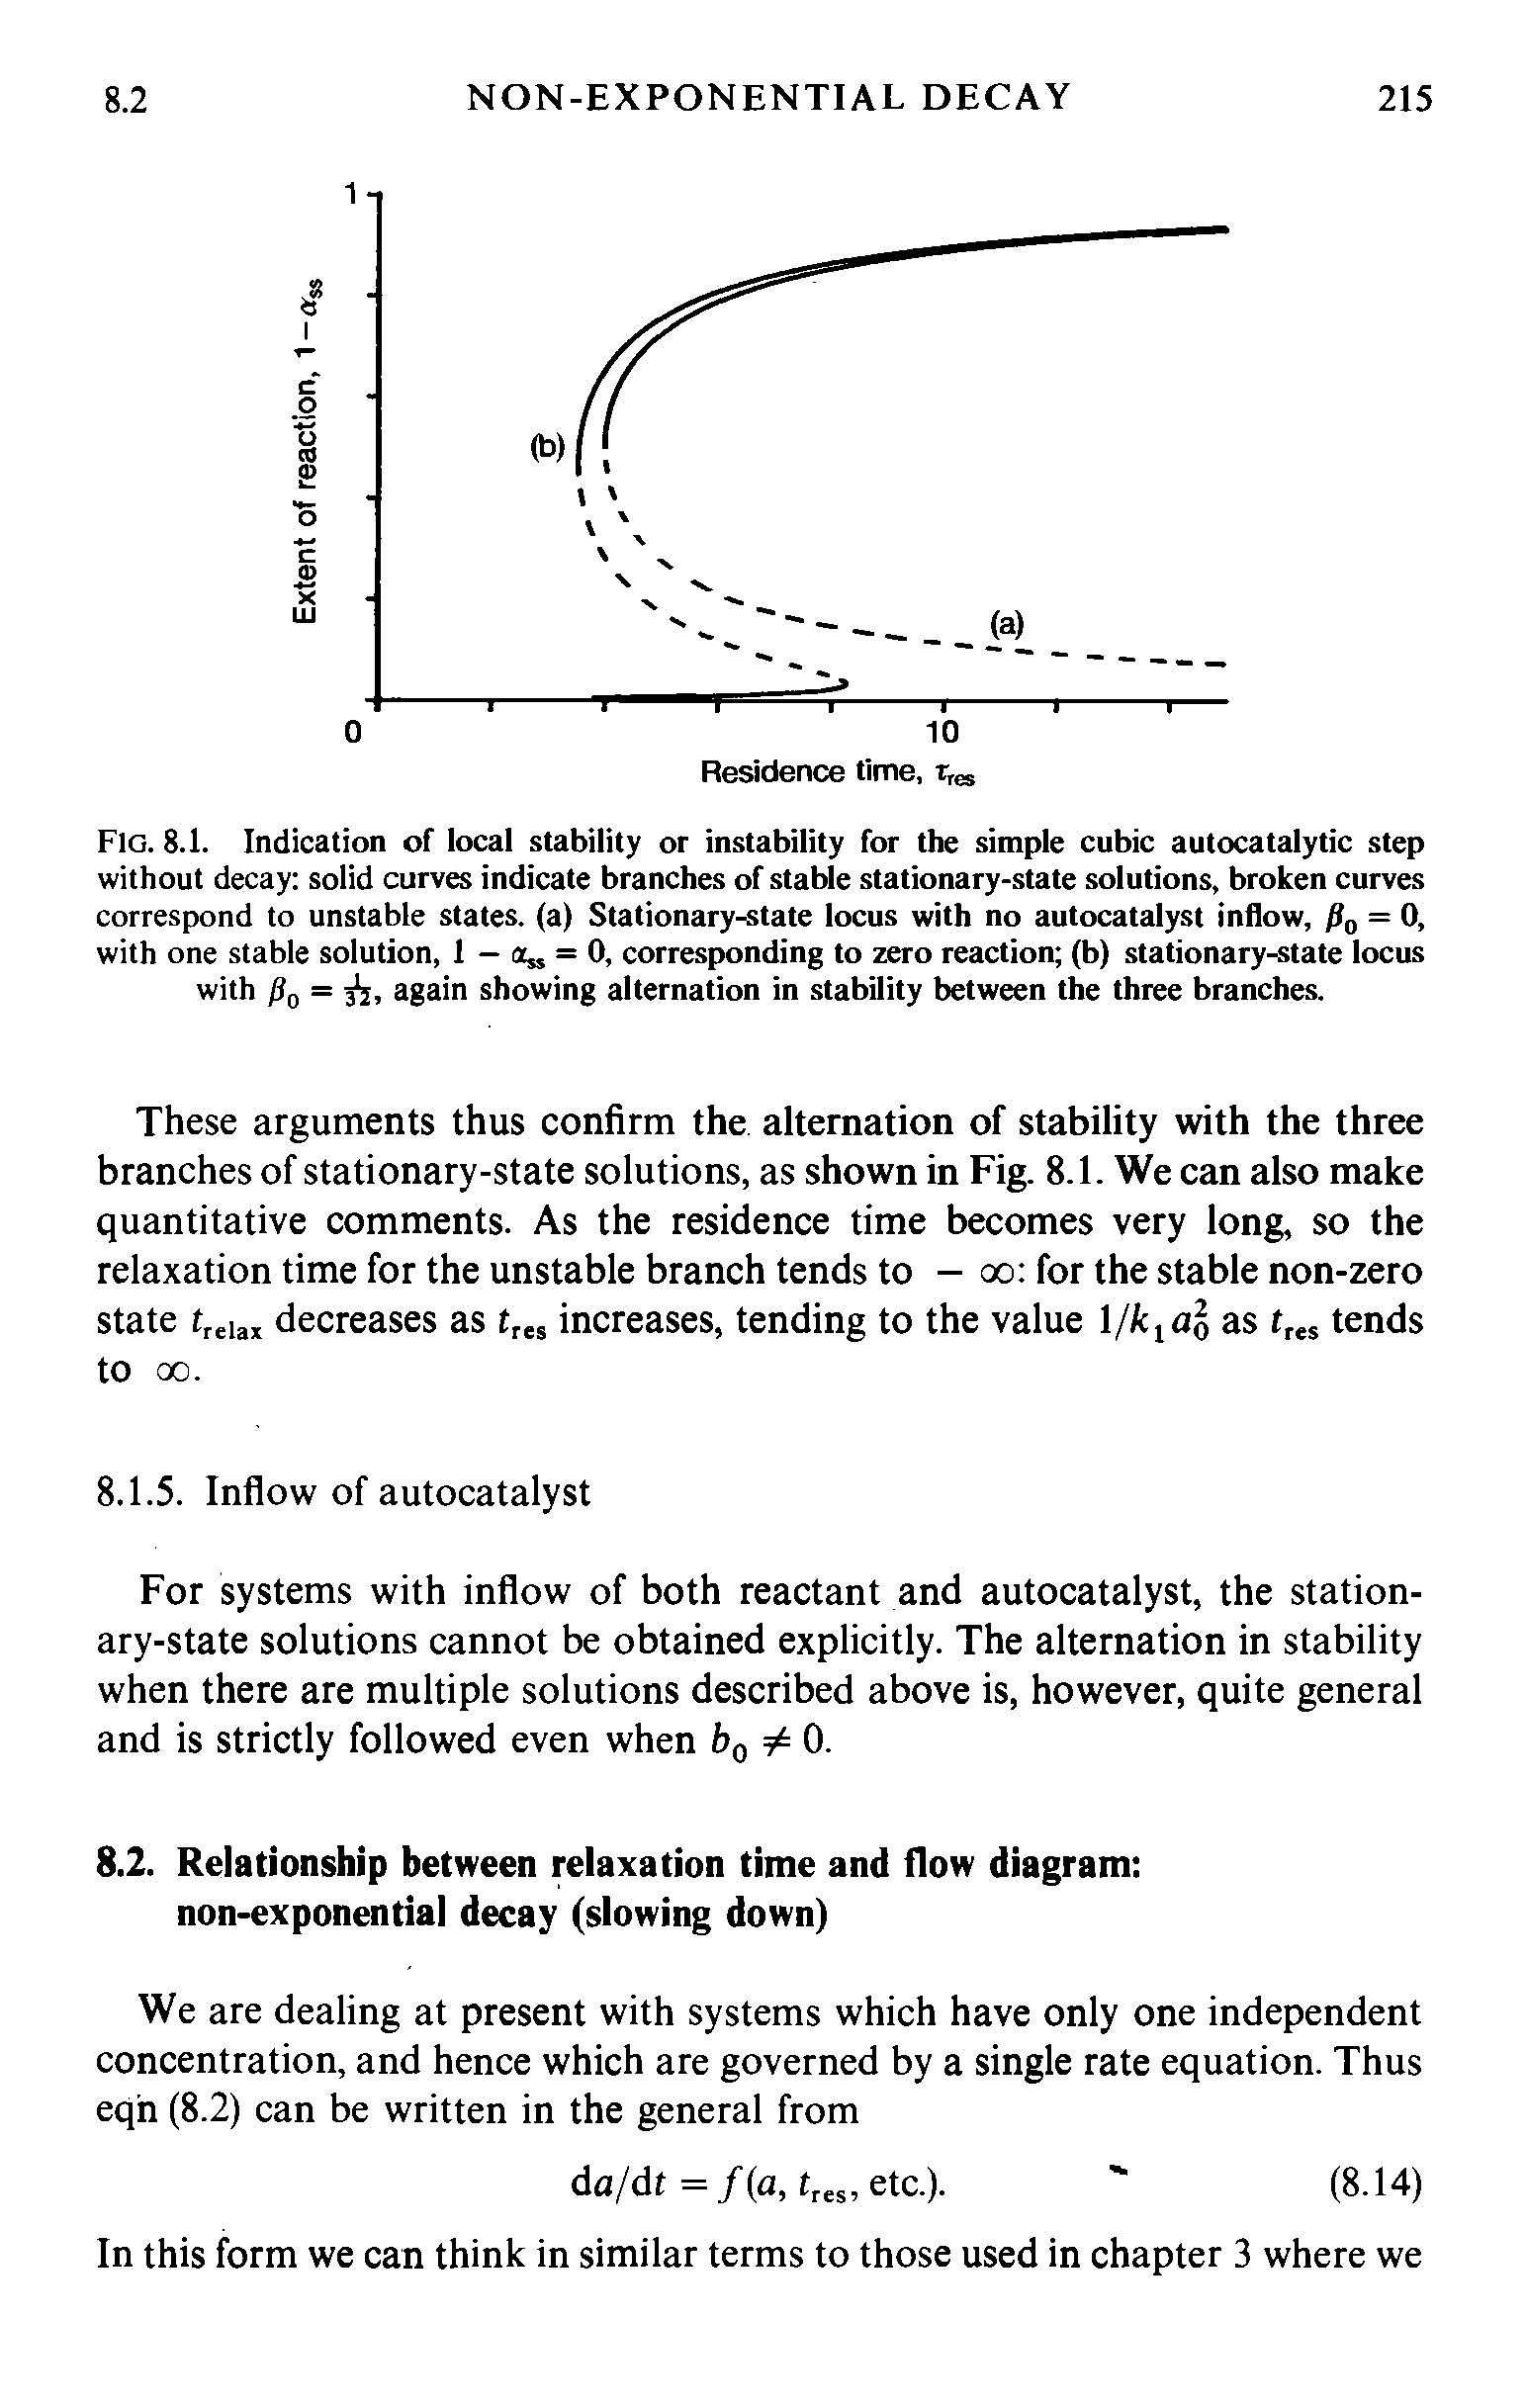 Fig. 8.1. Indication of local stability or instability for the simple cubic autocatalytic step without decay solid curves indicate branches of stable stationary-state solutions, broken curves correspond to unstable states, (a) Stationary-state locus with no autocatalyst inflow, fl0 = 0, with one stable solution, 1 - = 0, corresponding to zero reaction (b) stationary-state locus...